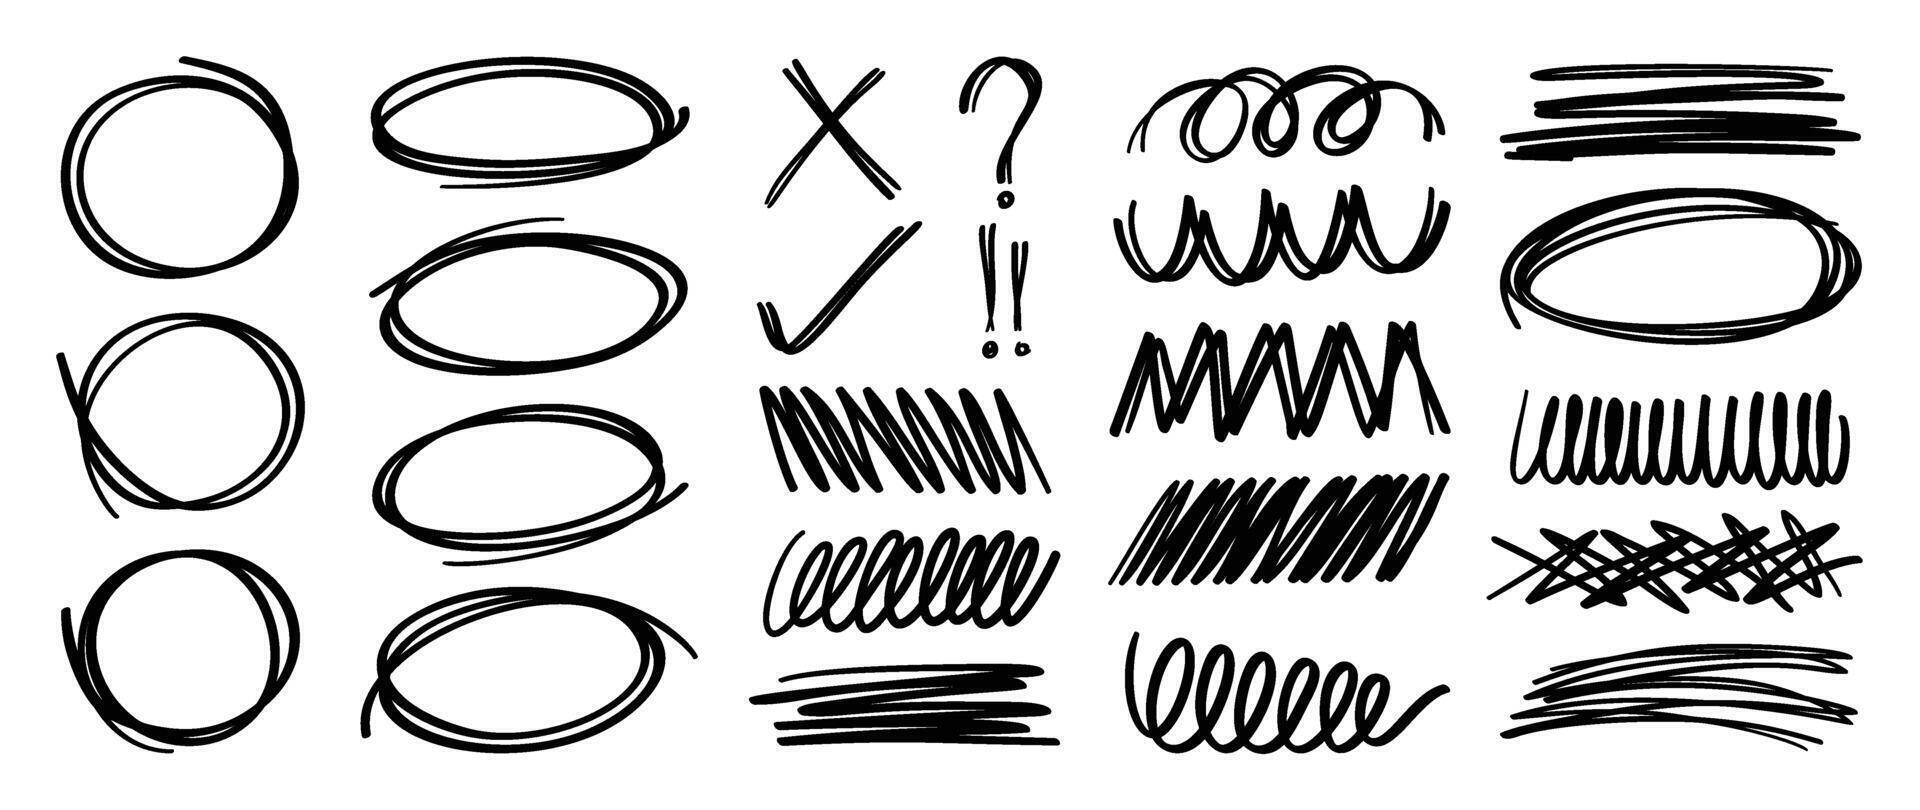 Set of scribble doodle element . Hand drawn doodle style collection of speech bubble, scribble, marker, highlight, symbol. Design for print, cartoon, card, decoration, sticker. vector